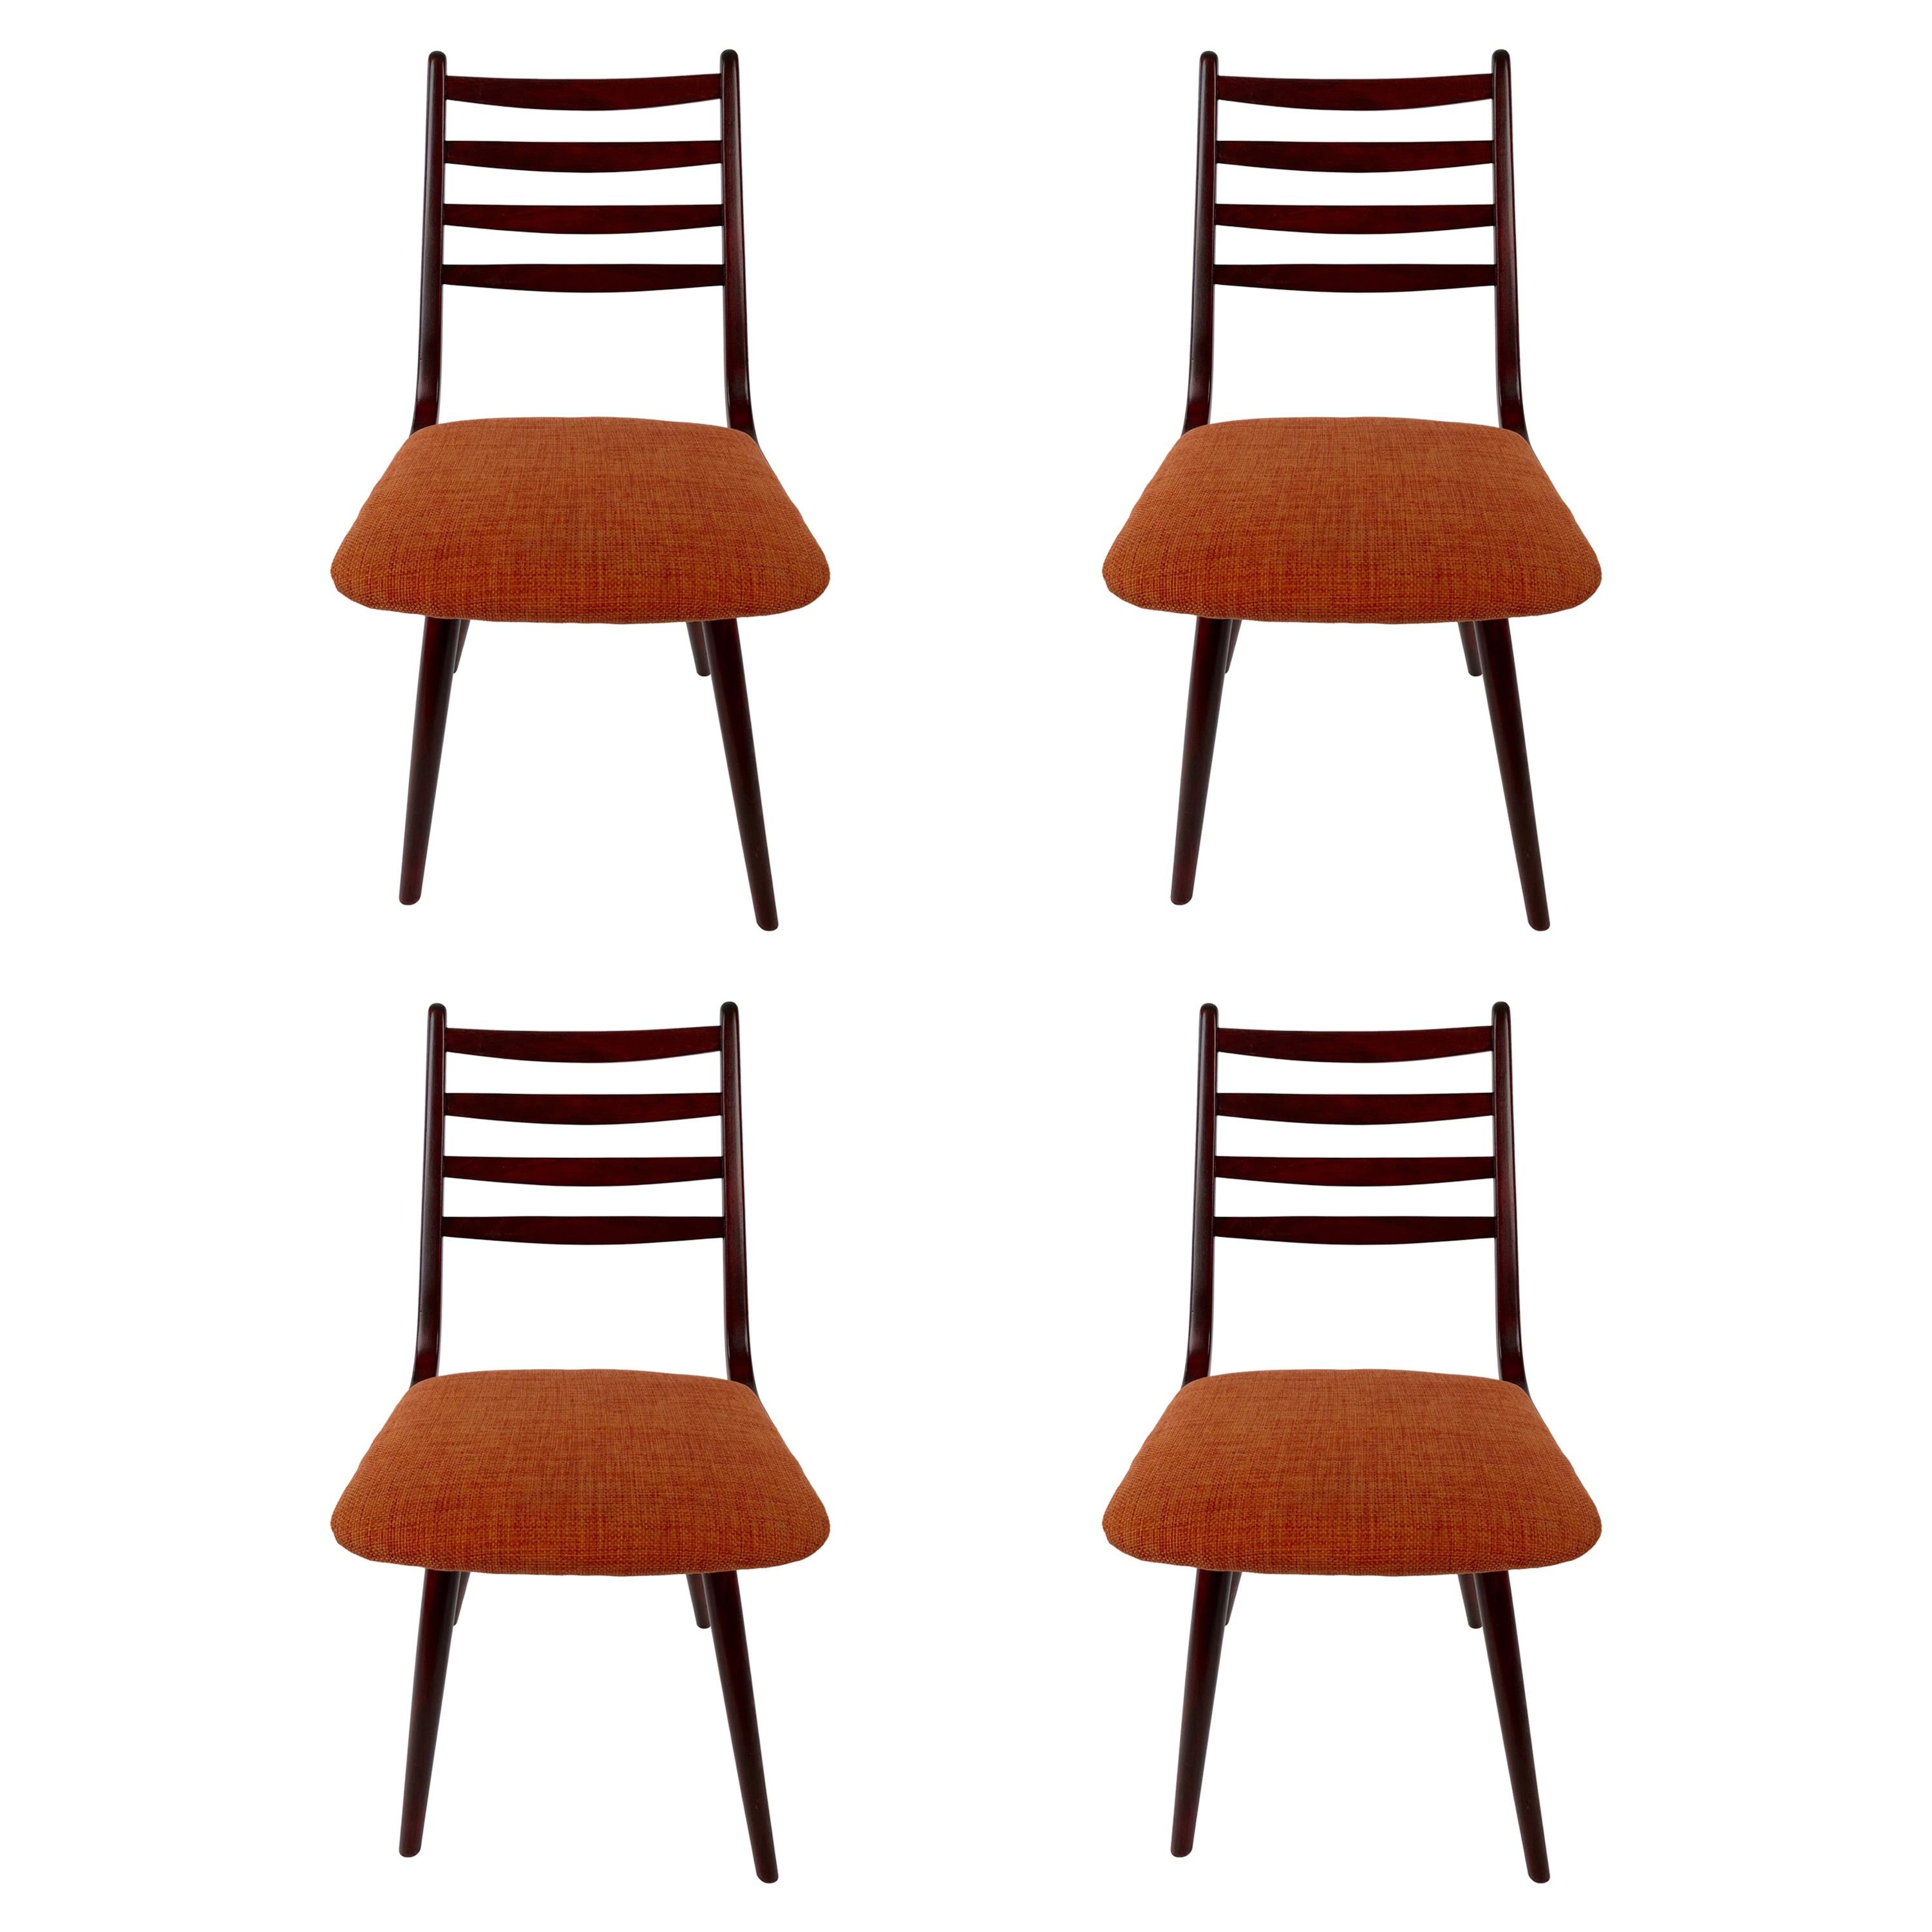 Set of 4 Dinning Chairs, 1970's, Thonet Factory For Sale